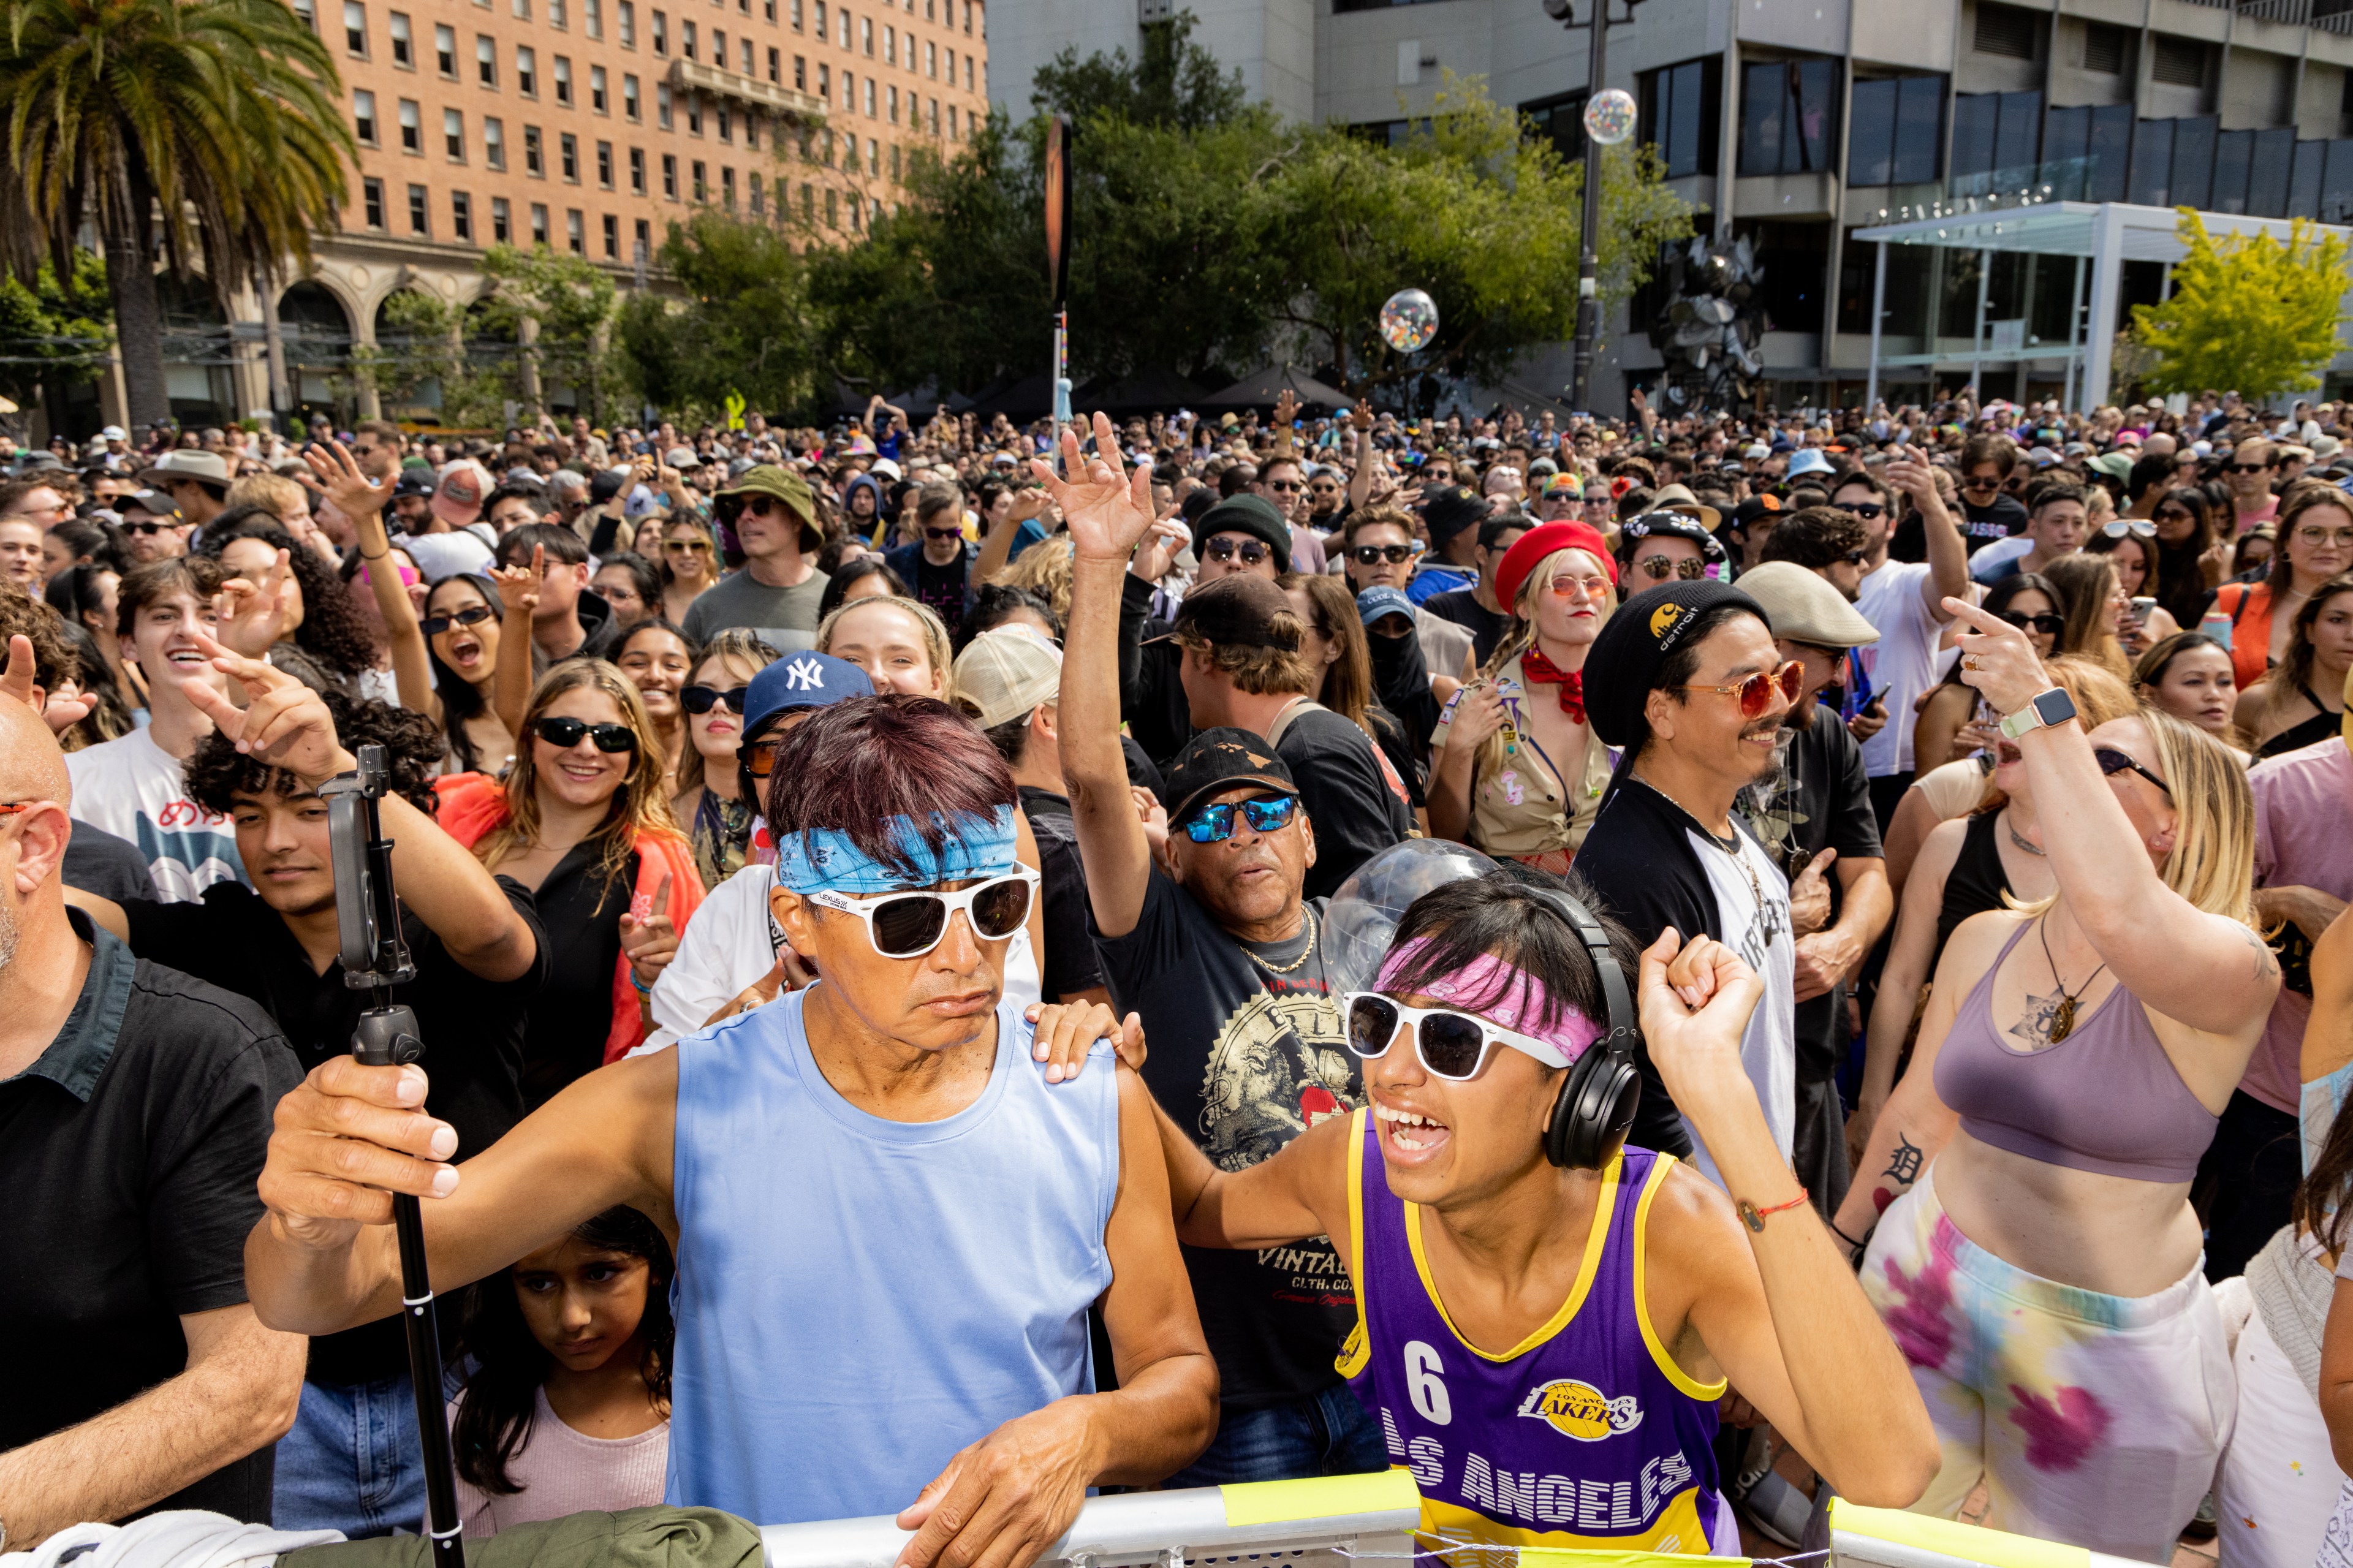 A lively crowd at an outdoor event with people wearing bright clothes, sunglasses, and headbands; some are waving and cheering, with a mixture of joy and energy.